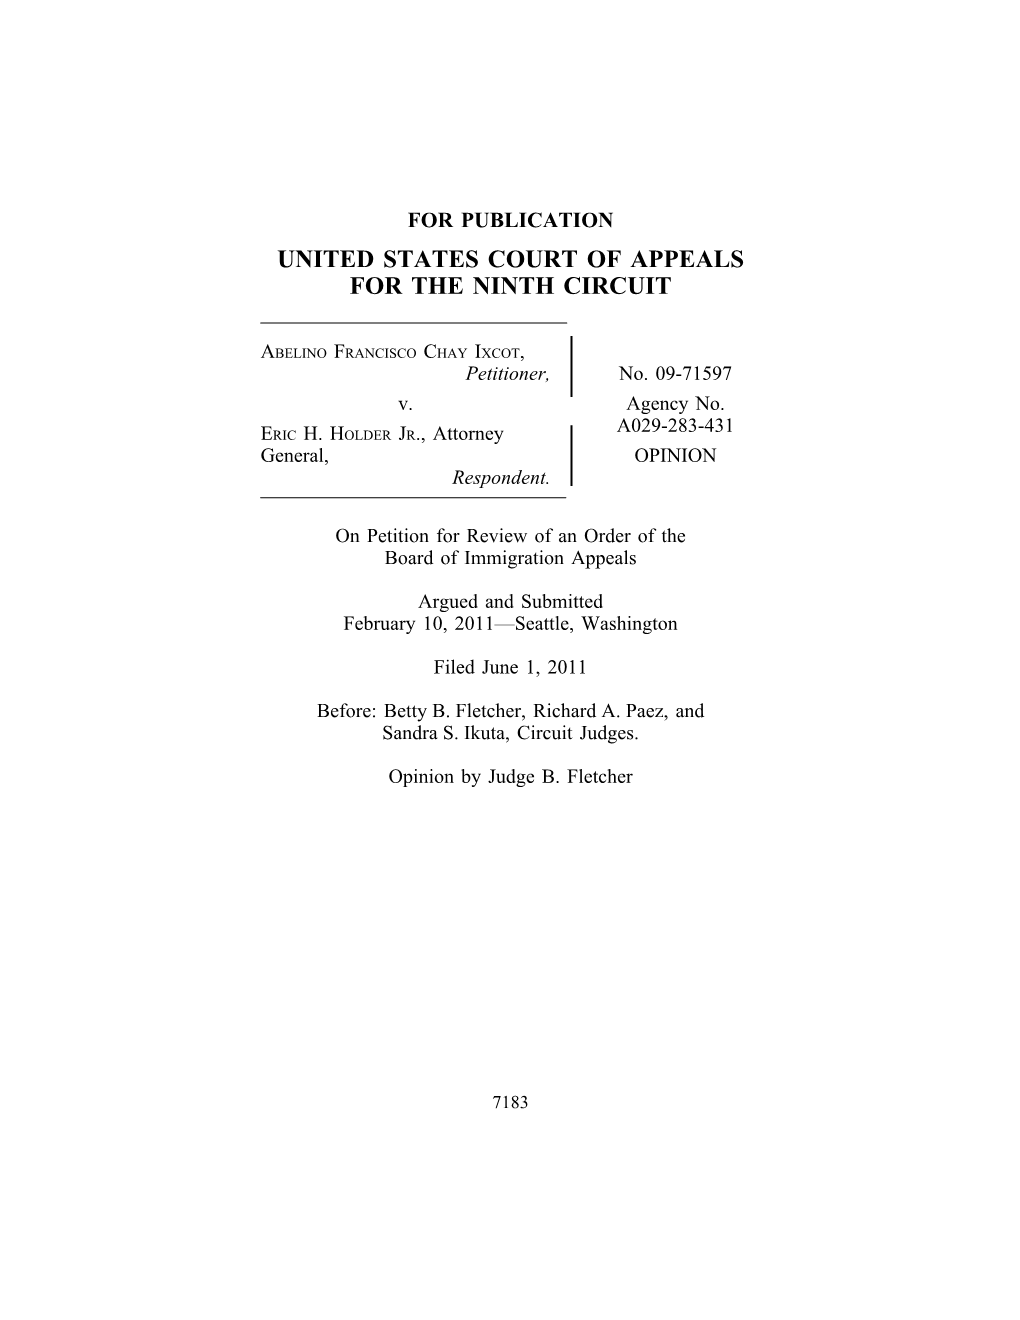 United States Court of Appeals for the Ninth Circuit